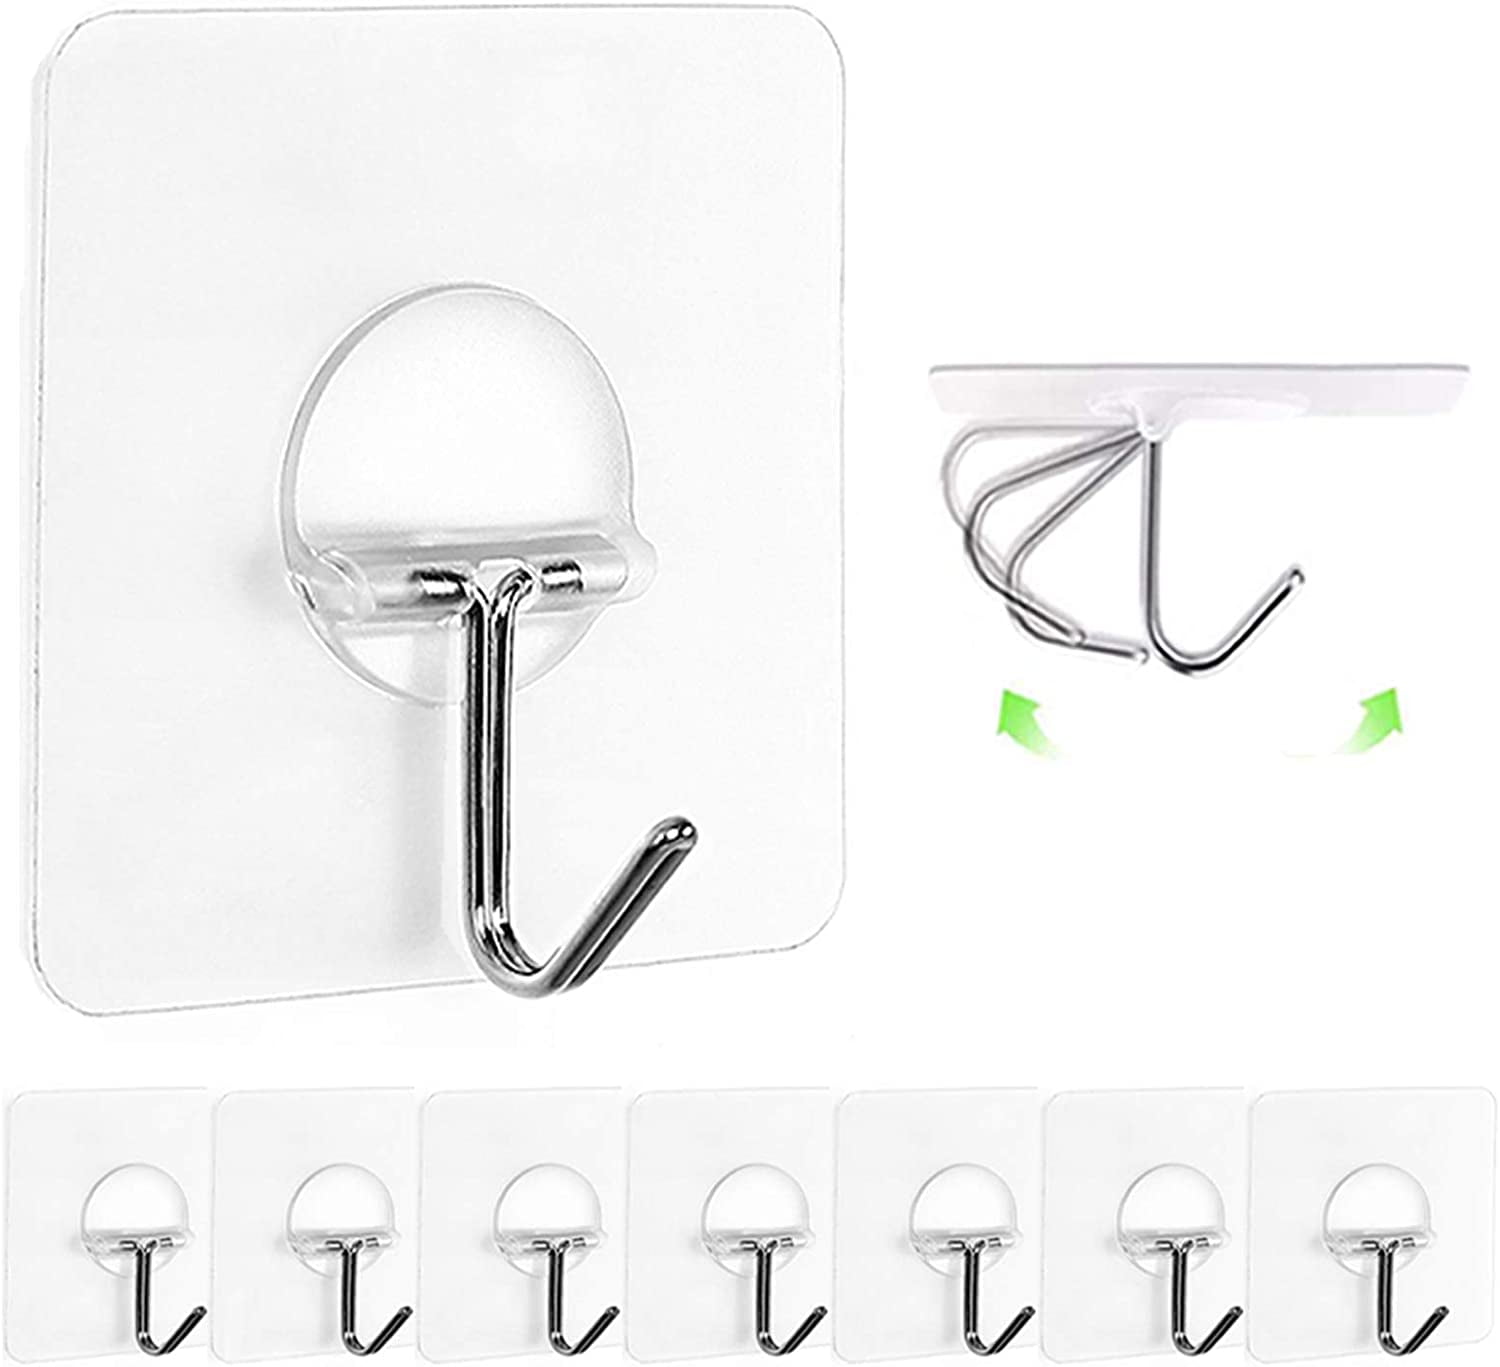 5 Self Adhesive Strong Sticky Hooks Heavy Duty Wall Seamless Transparent Hook 